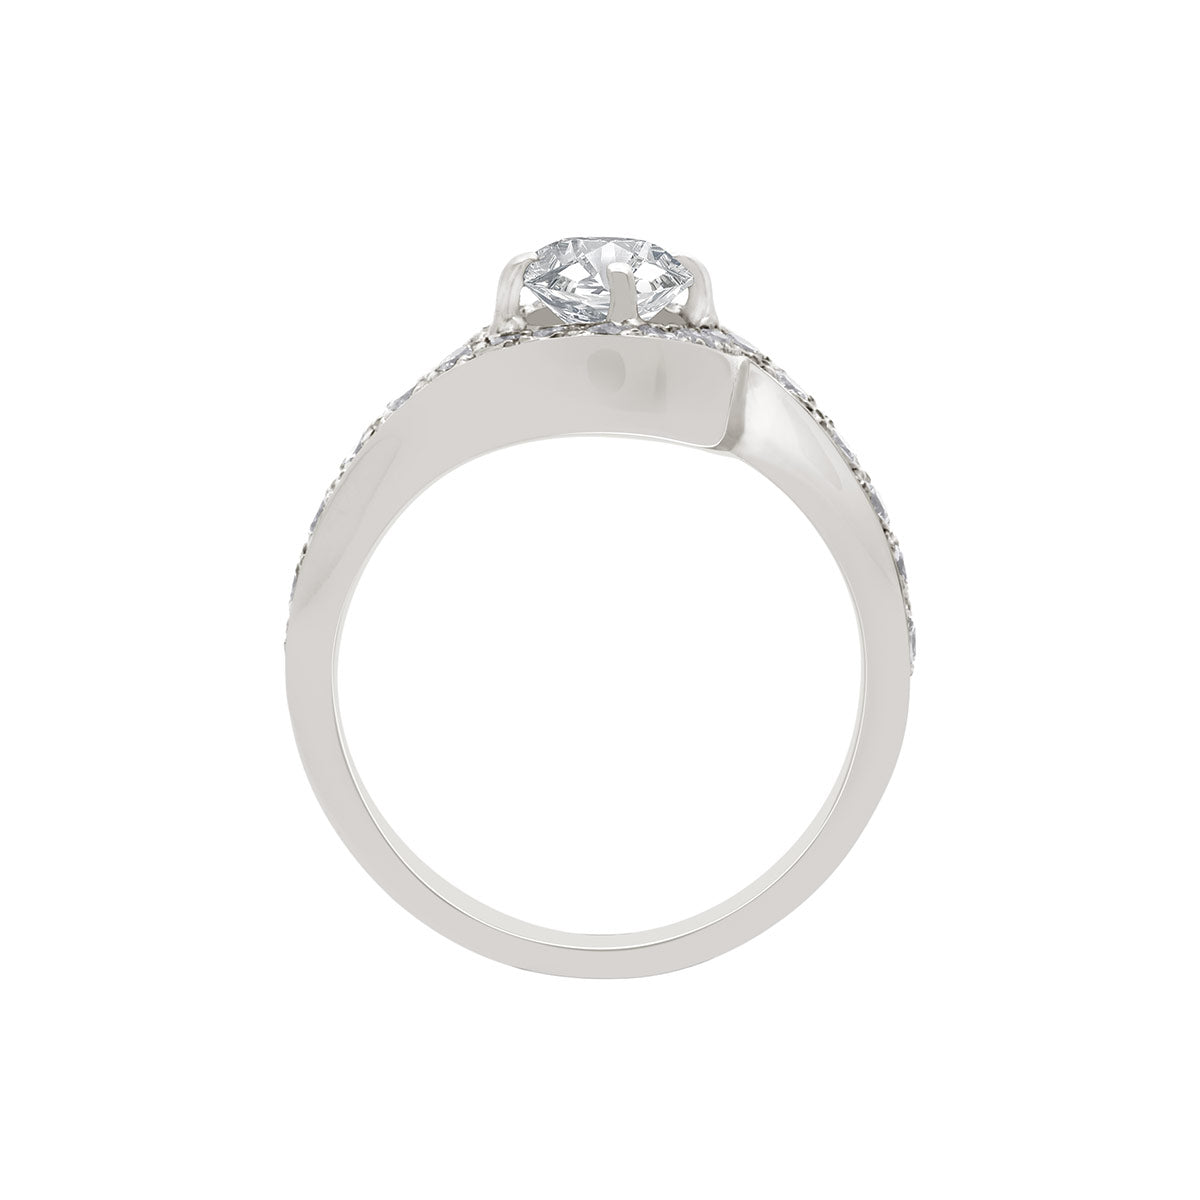 Halo Diamond Twist Engagement Ring in upright position